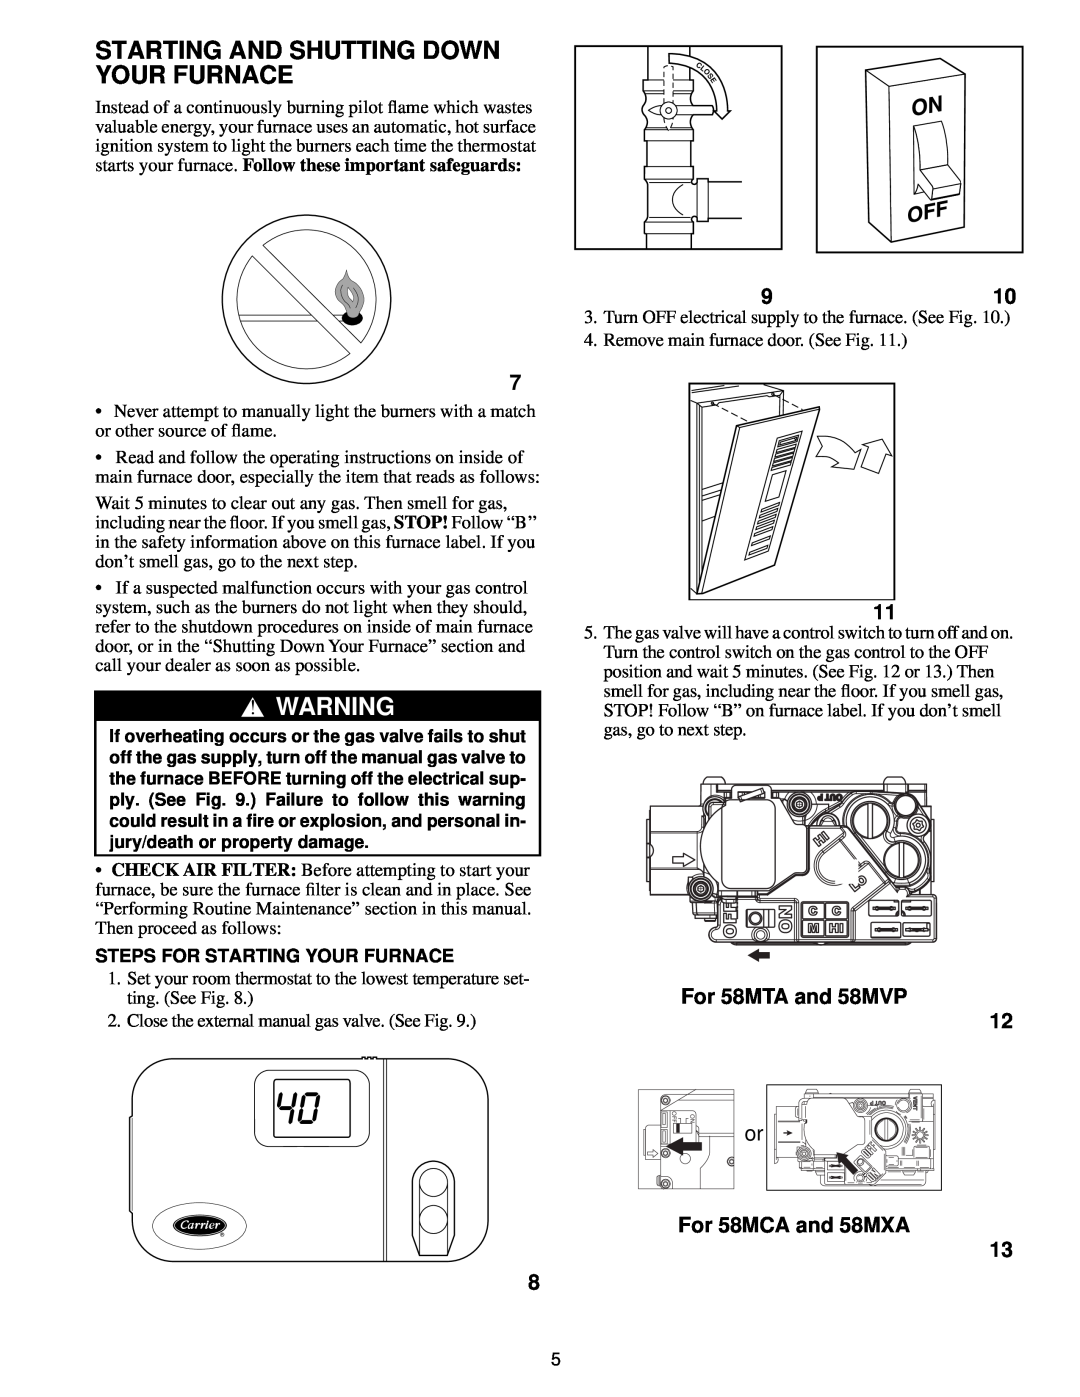 Carrier manual Starting And Shutting Down Your Furnace, For 58MTA and 58MVP, For 58MCA and 58MXA 